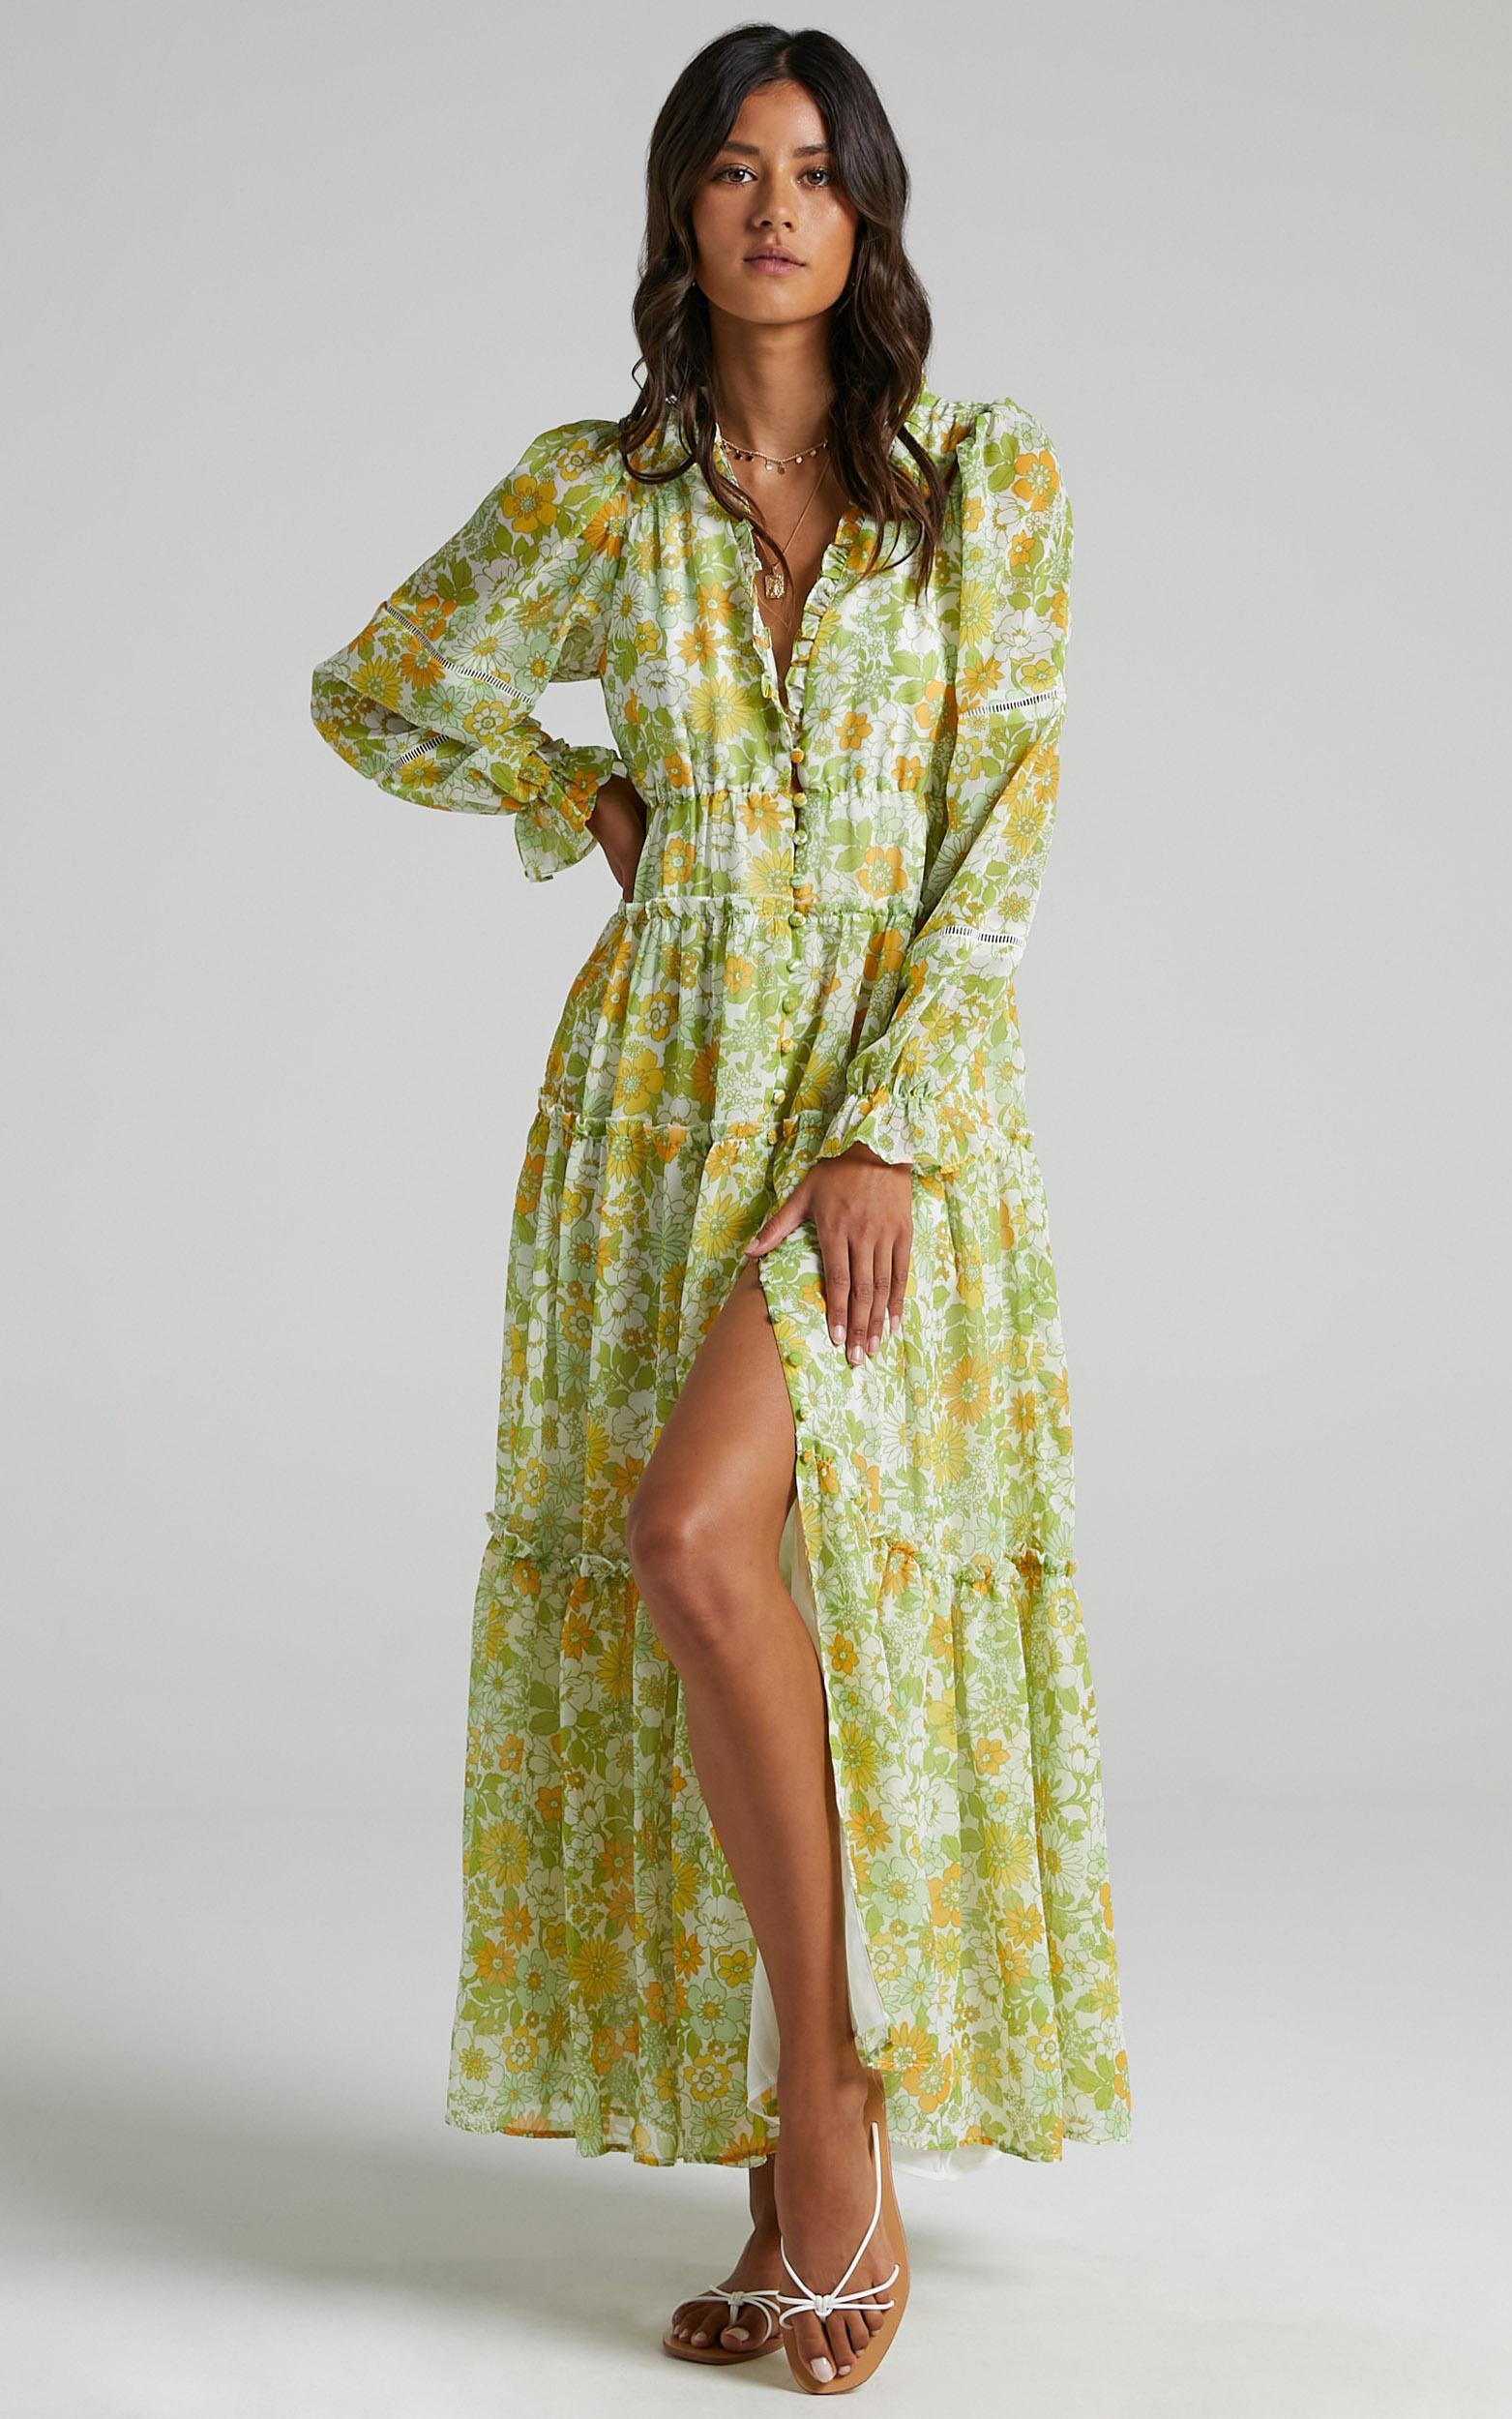 Syrna Dress in Harmony Floral - 06, MLT1, hi-res image number null